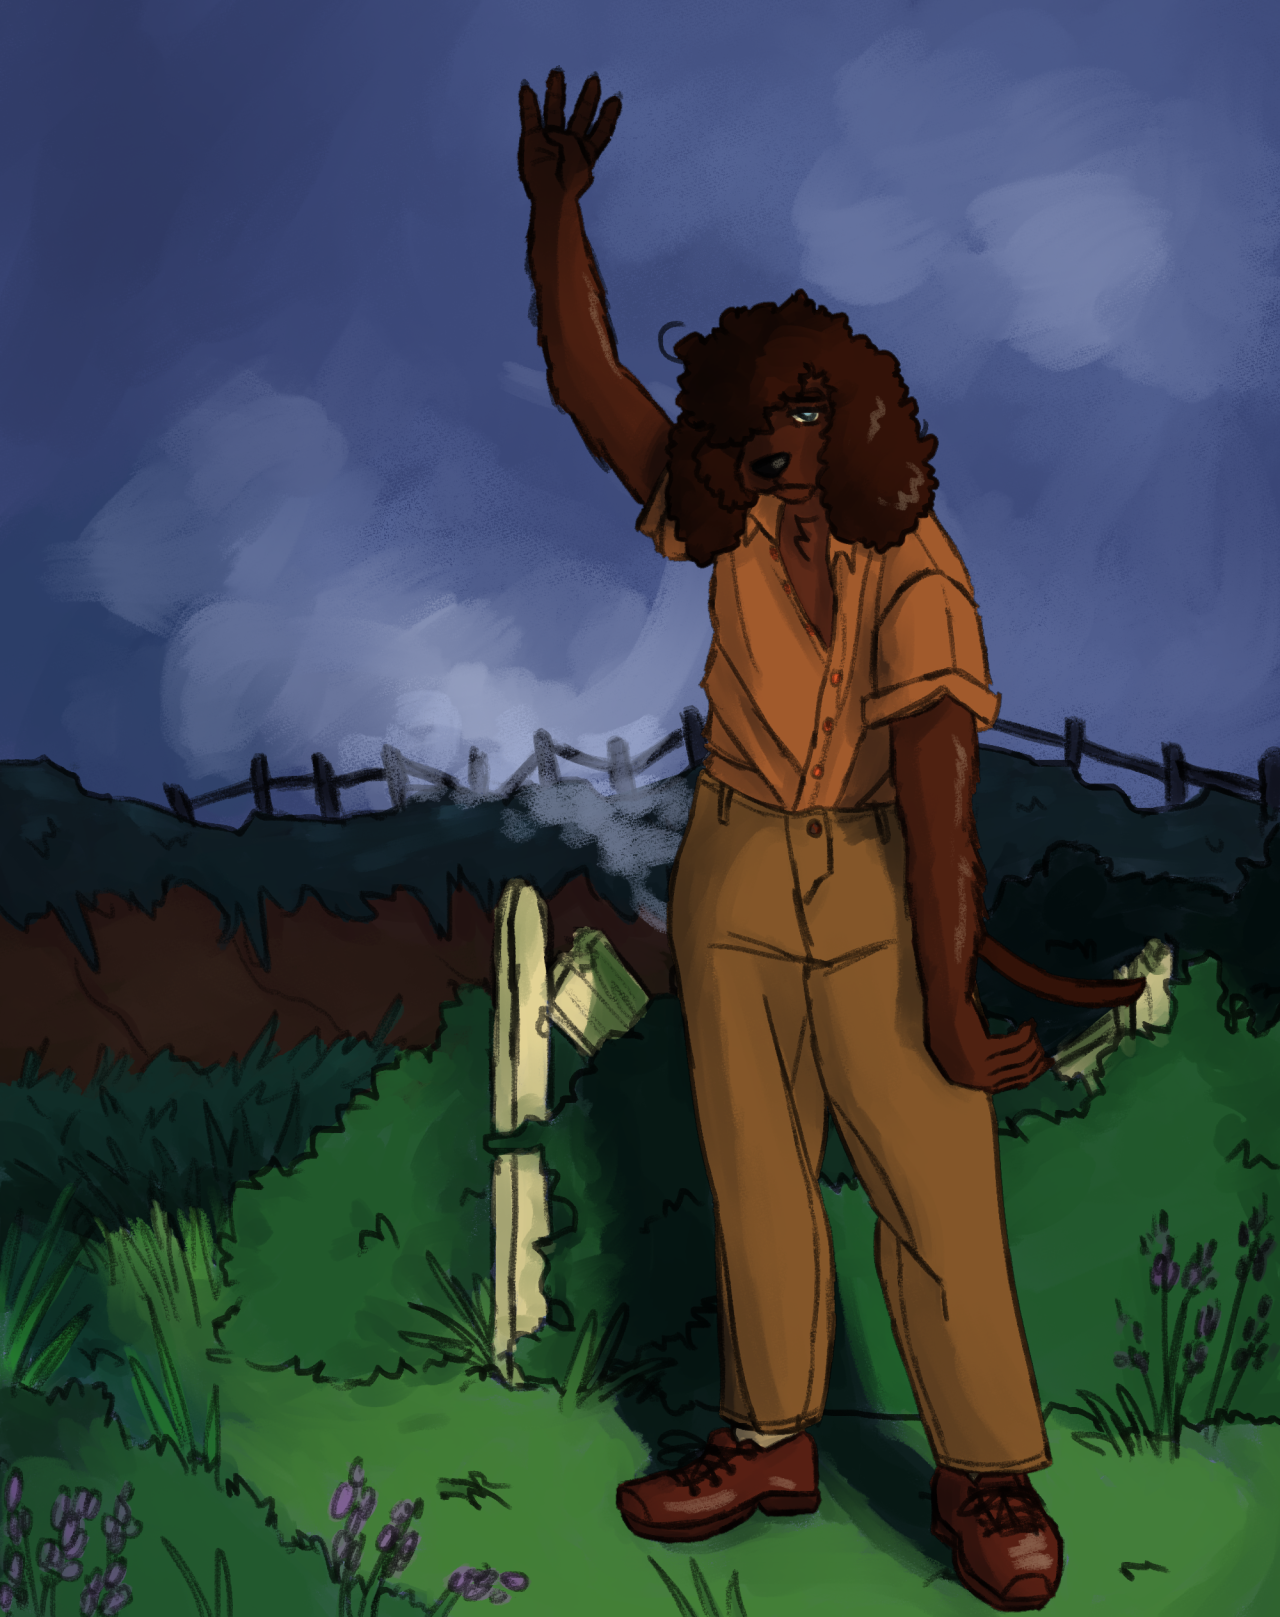 A drawing of an Irish water spaniel standing next to a broken fence and bushes, looking defeated. She's holding up four fingers.